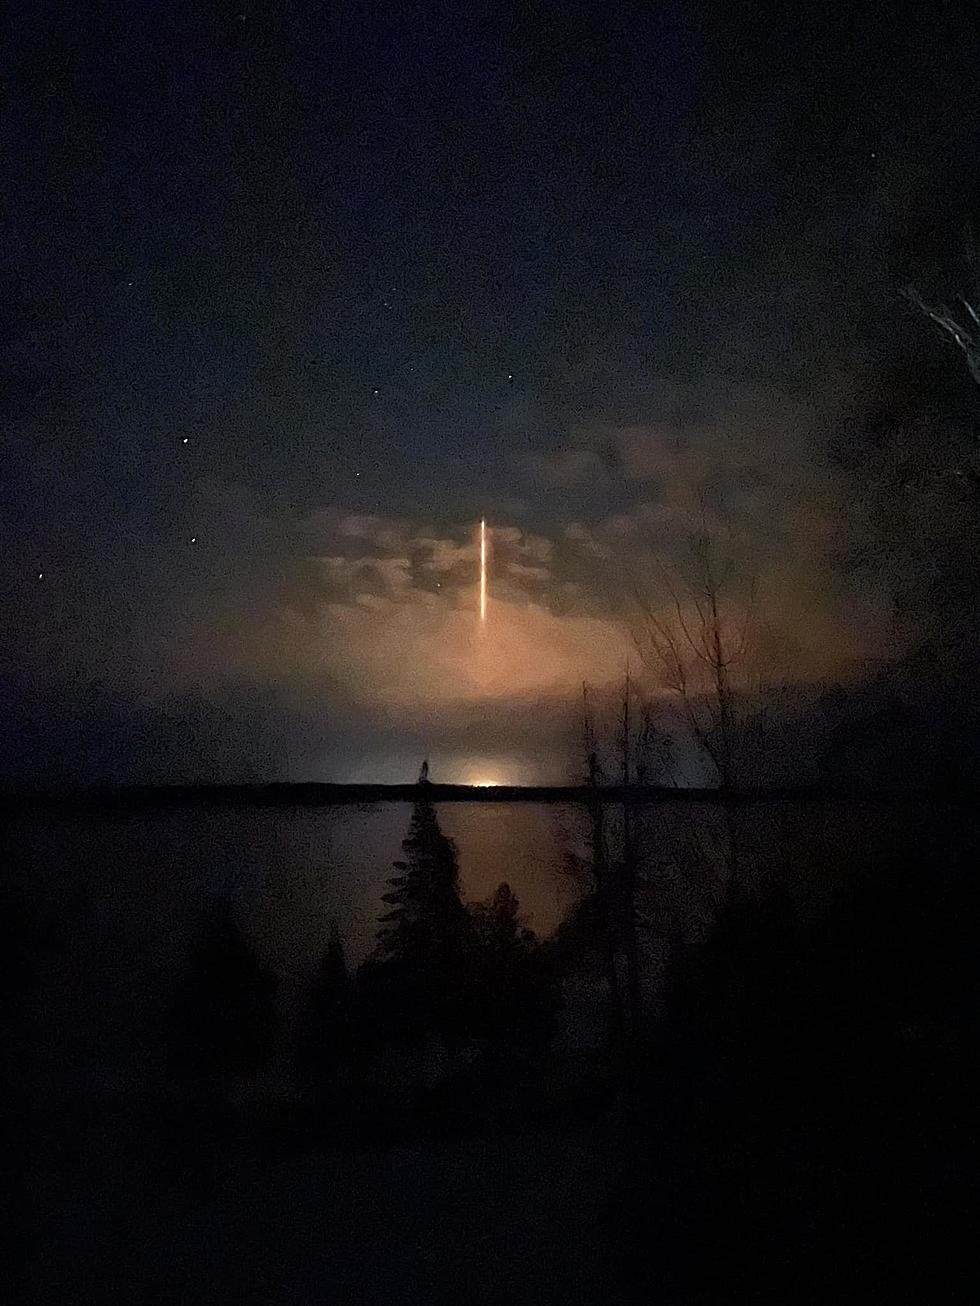 Magnificent Beam Of Light Spotted In Northern Minnesota – Rocket Launch? Aliens? Laser Beam?